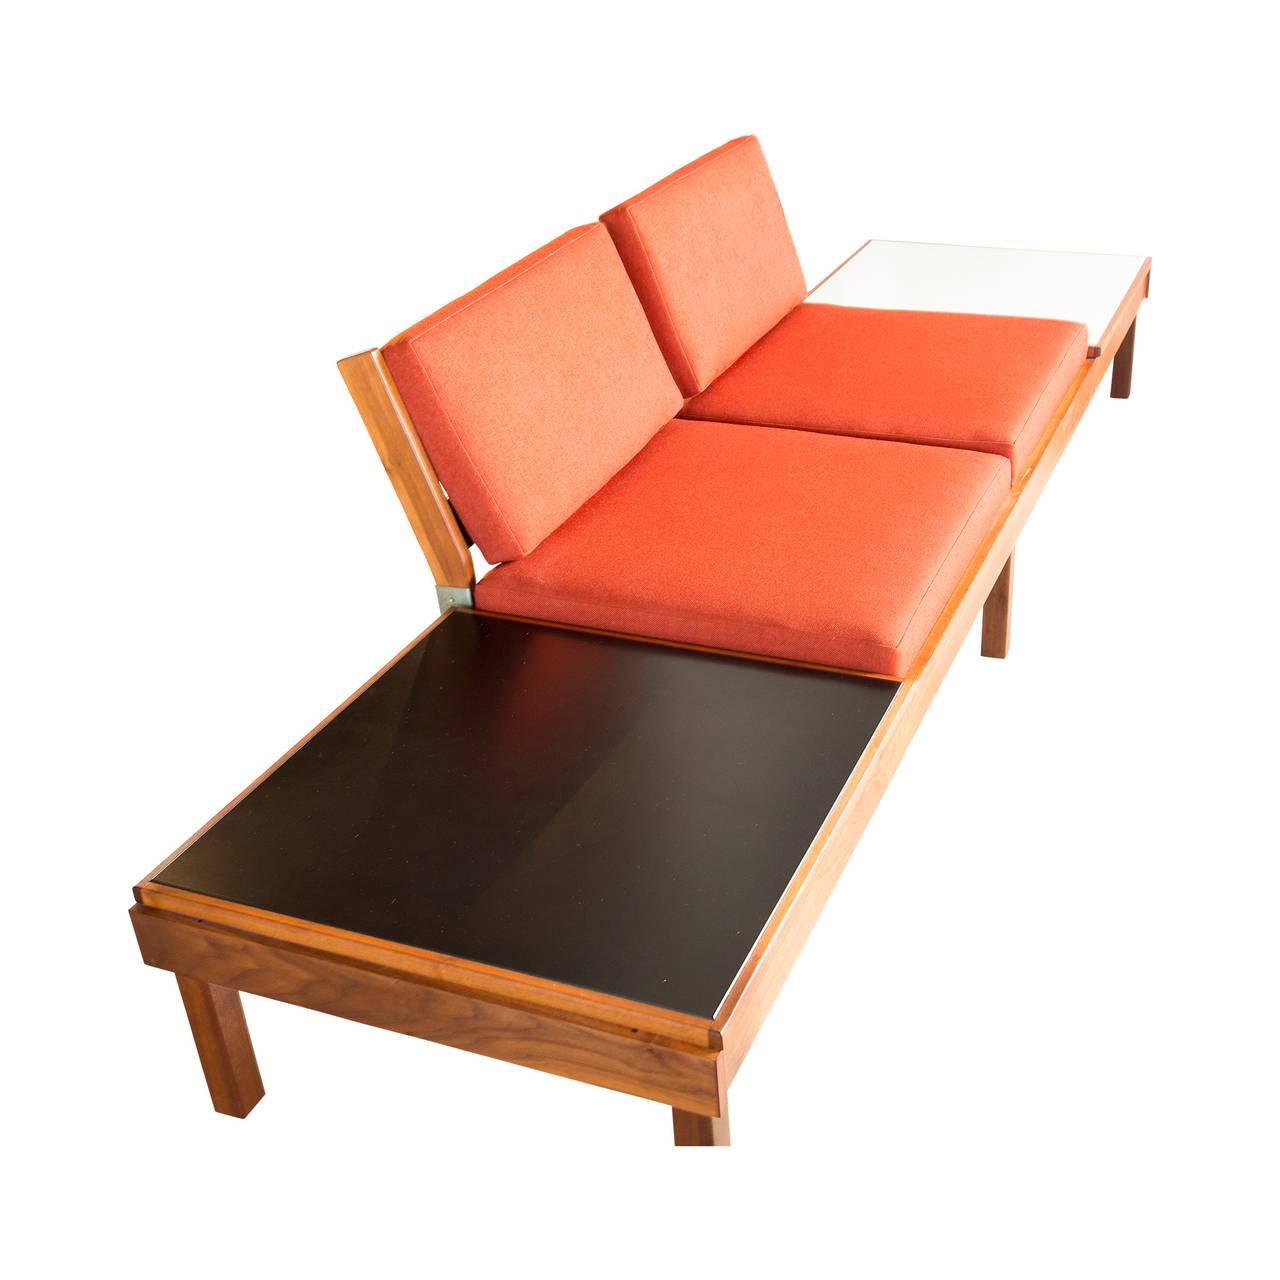 This beautiful, orange modular sofa set by Martin Borenstein for Brown & Saltman is a true Mid-Century Modern treasure, it sits low to the ground for the ultimate lounge vibe. The seats, armrests and black and white tables can be rearranged to